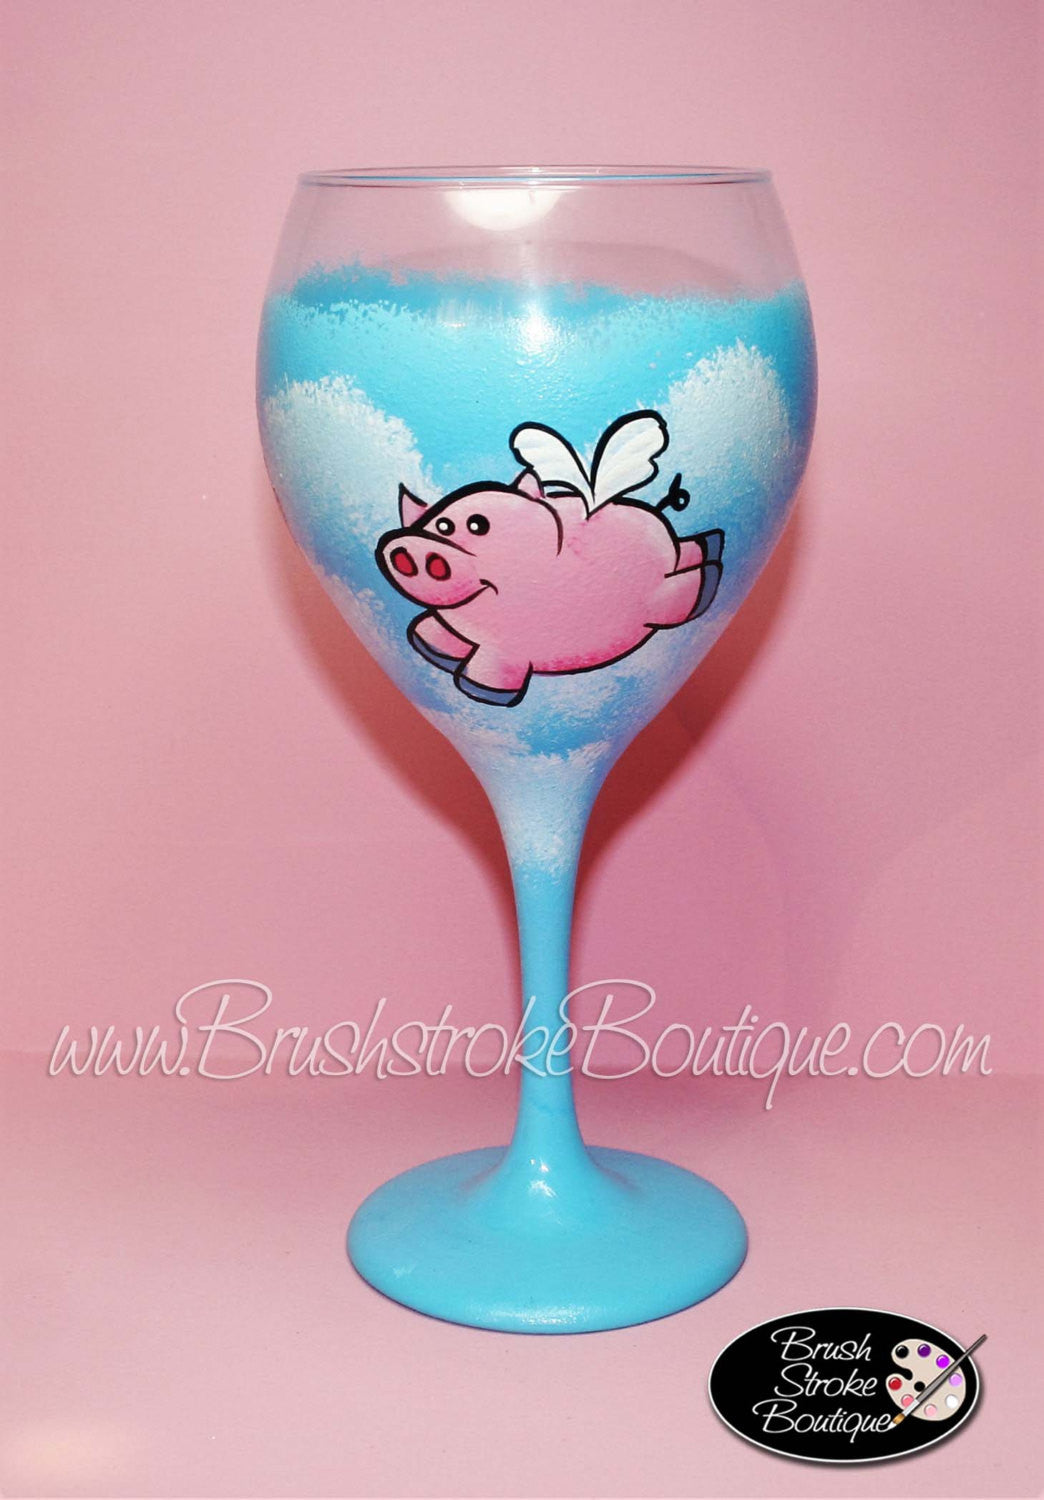 Hand Painted Wine Glass - When Pigs Fly - Original Designs by Cathy Kraemerccasions